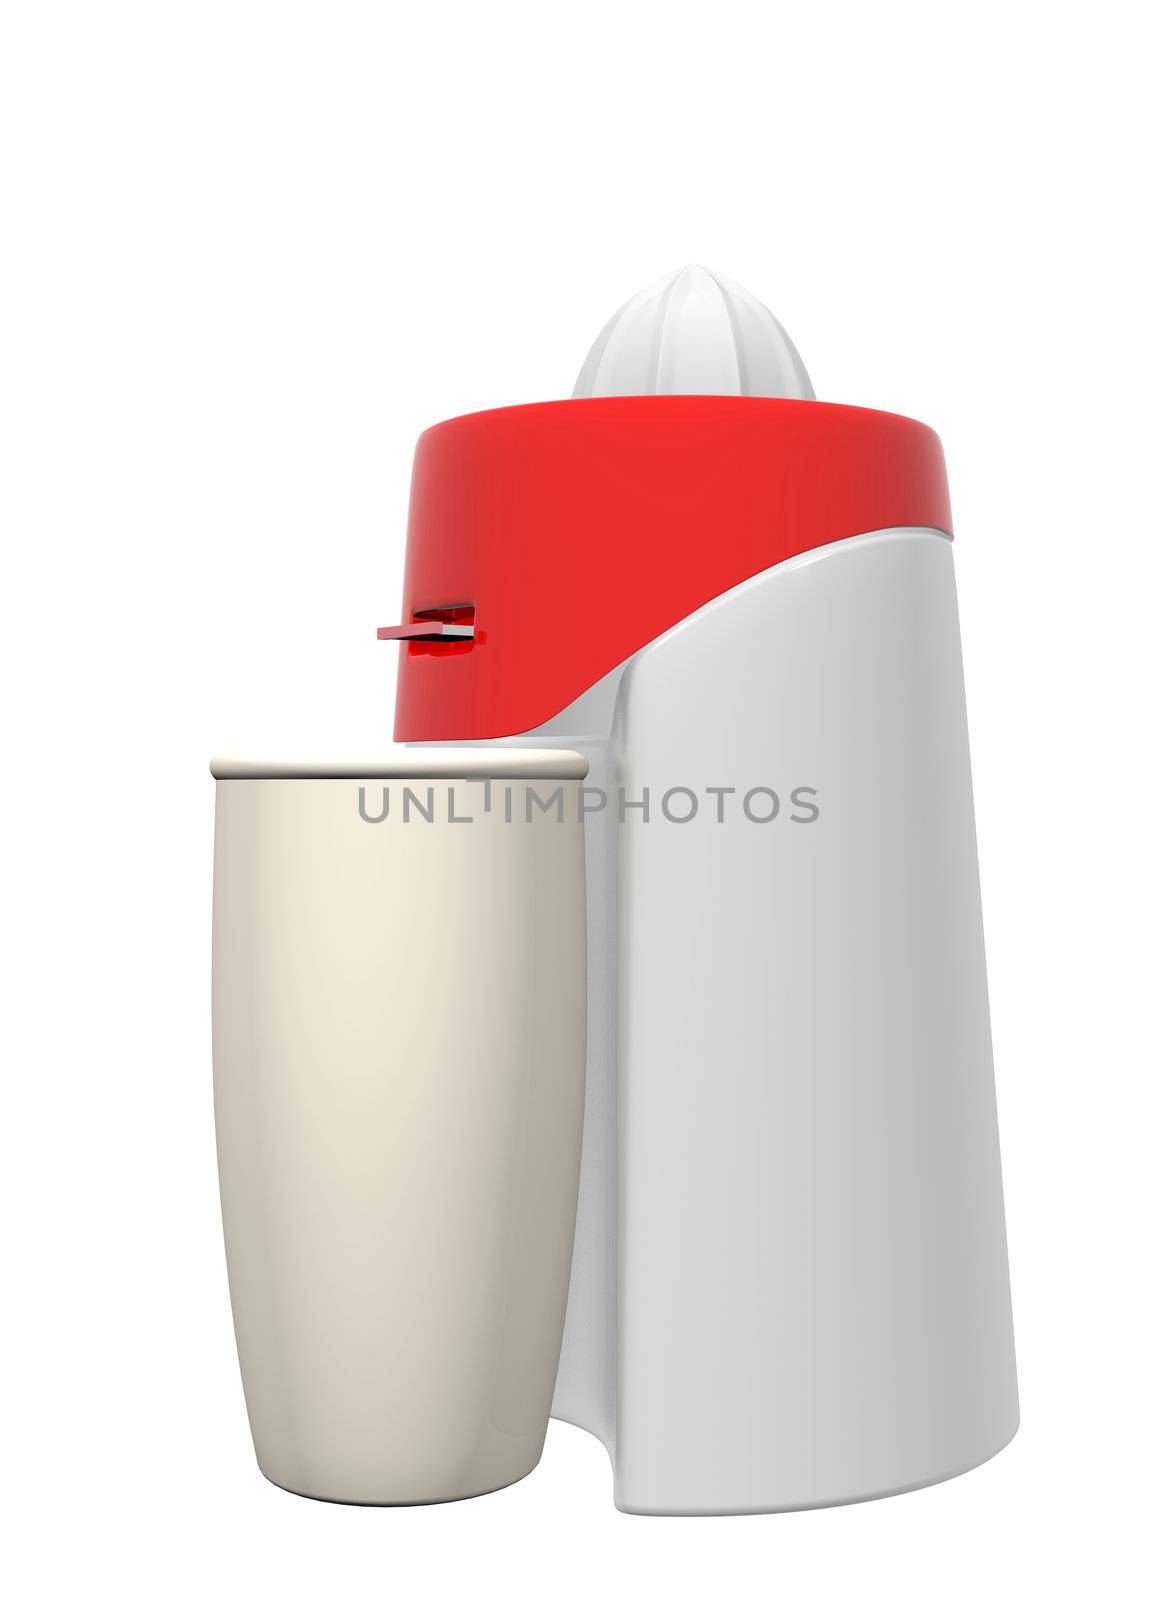 Red and white juicer and tall beige glass, 3D illustration, isolated against a white background